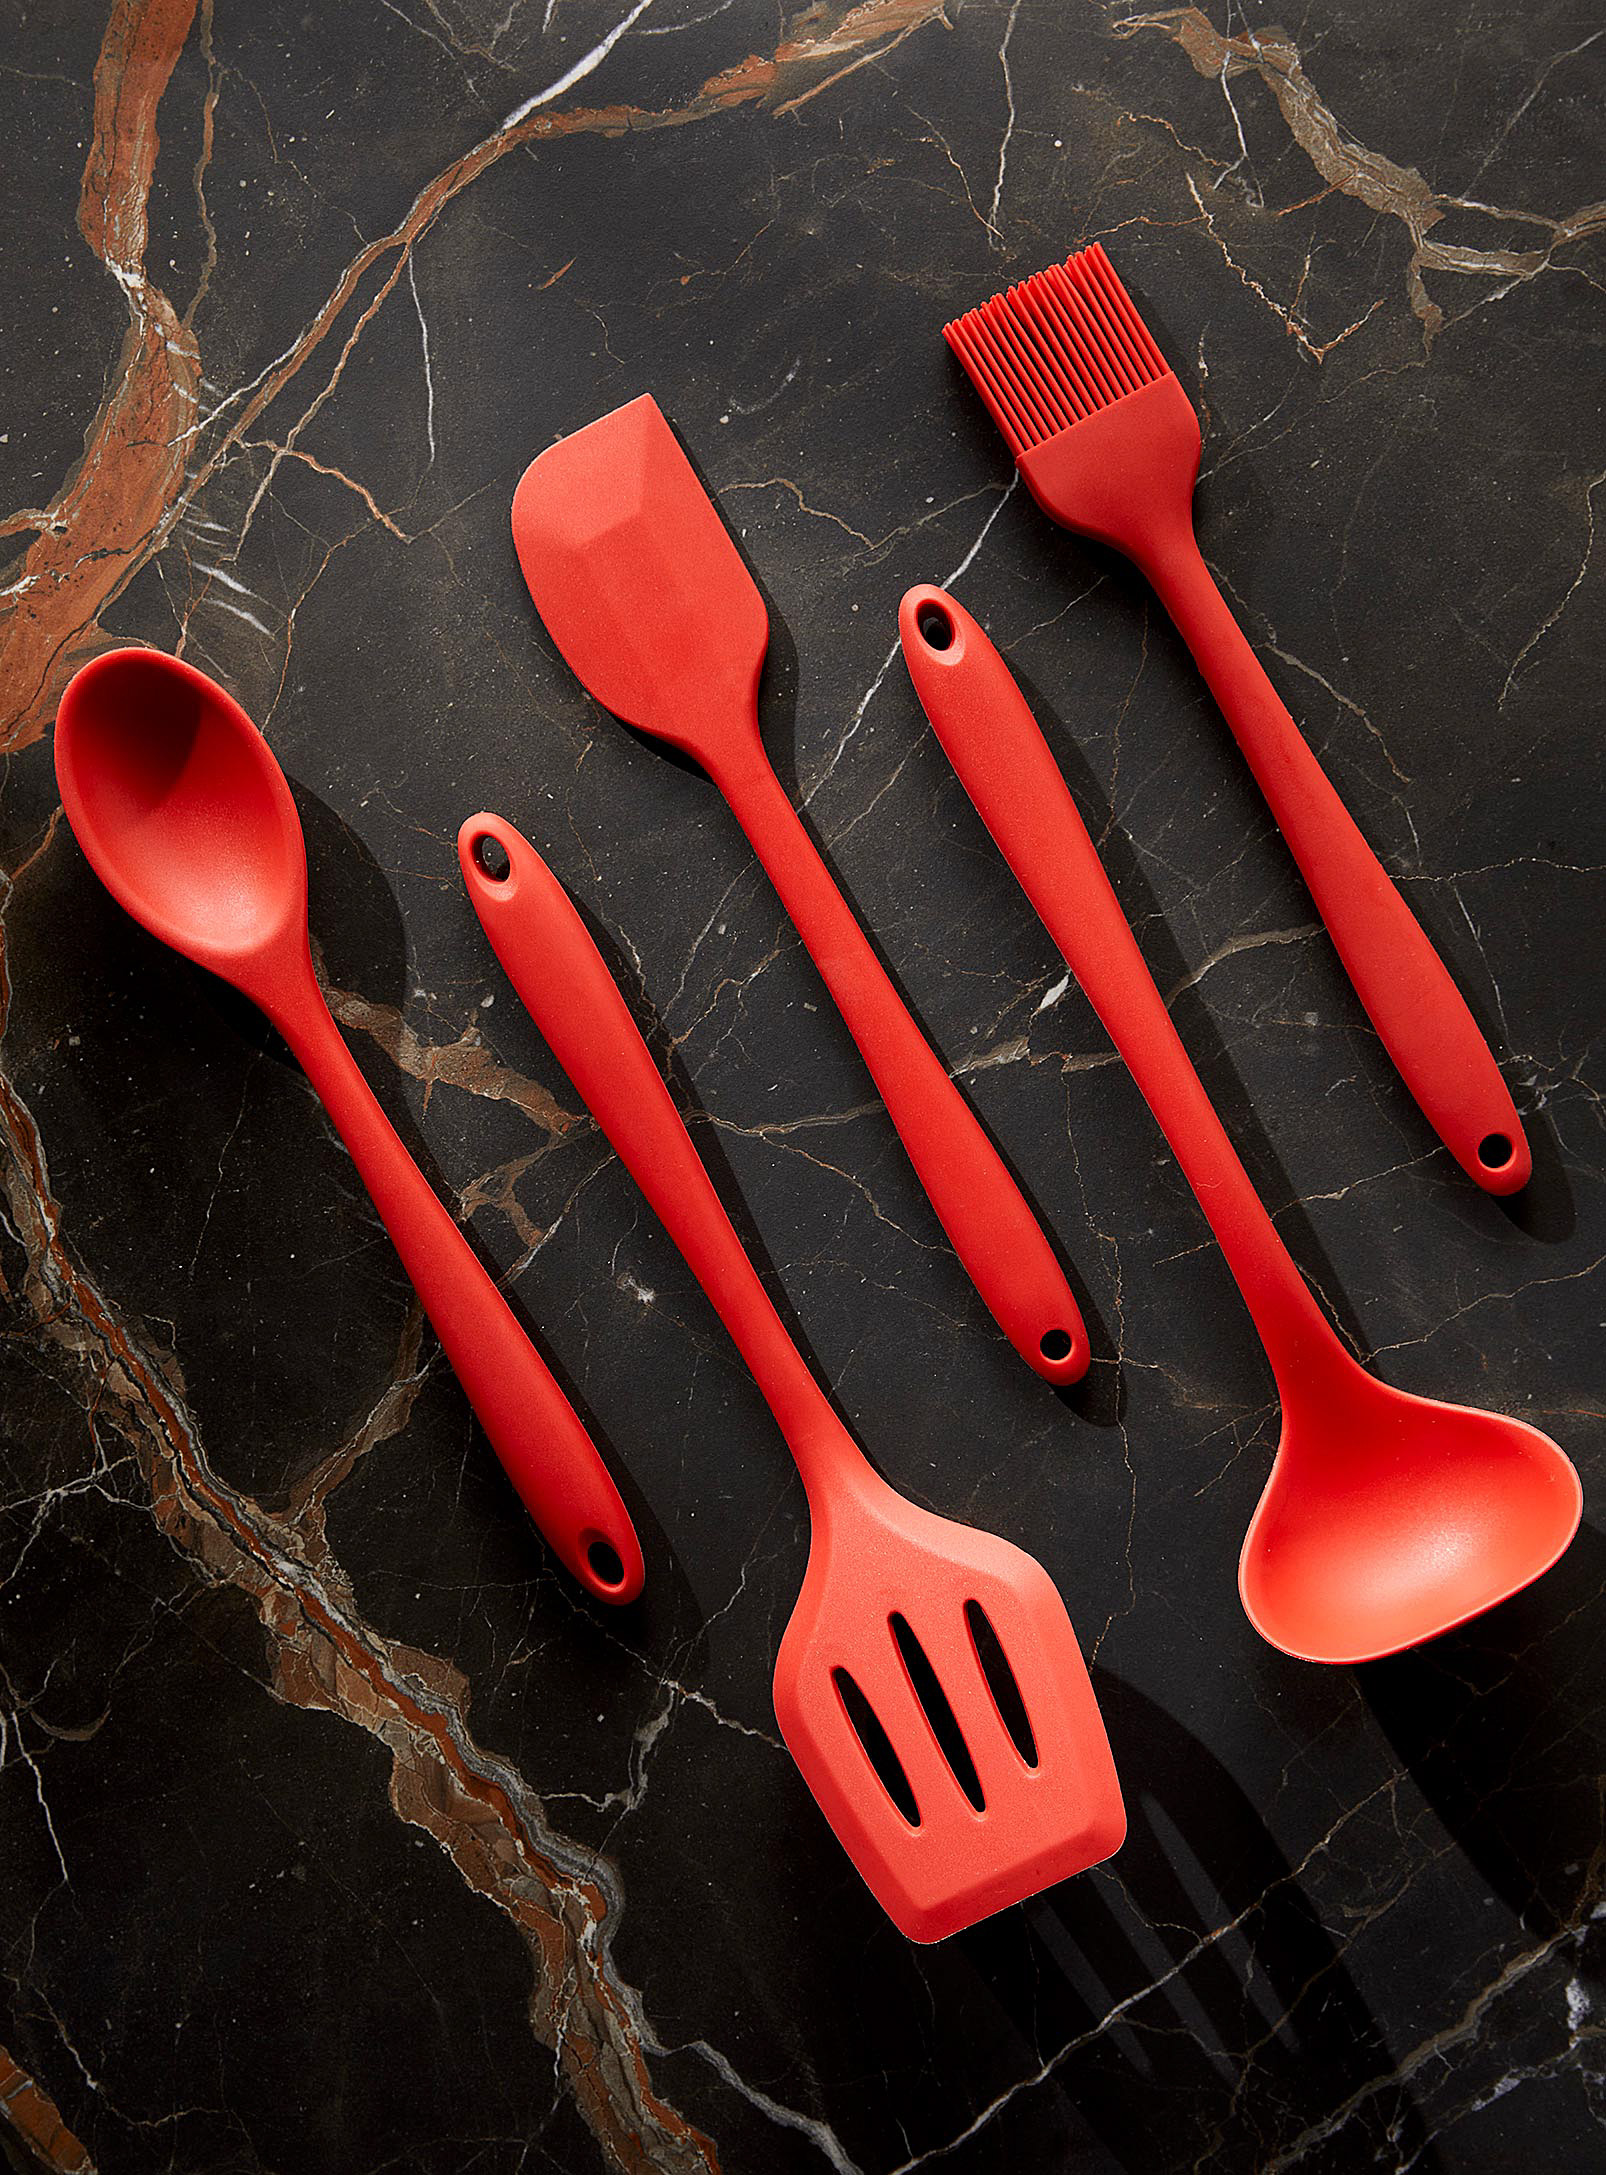 Simons Maison Silicone Kitchen Utensils Five-piece Set In Cherry Red